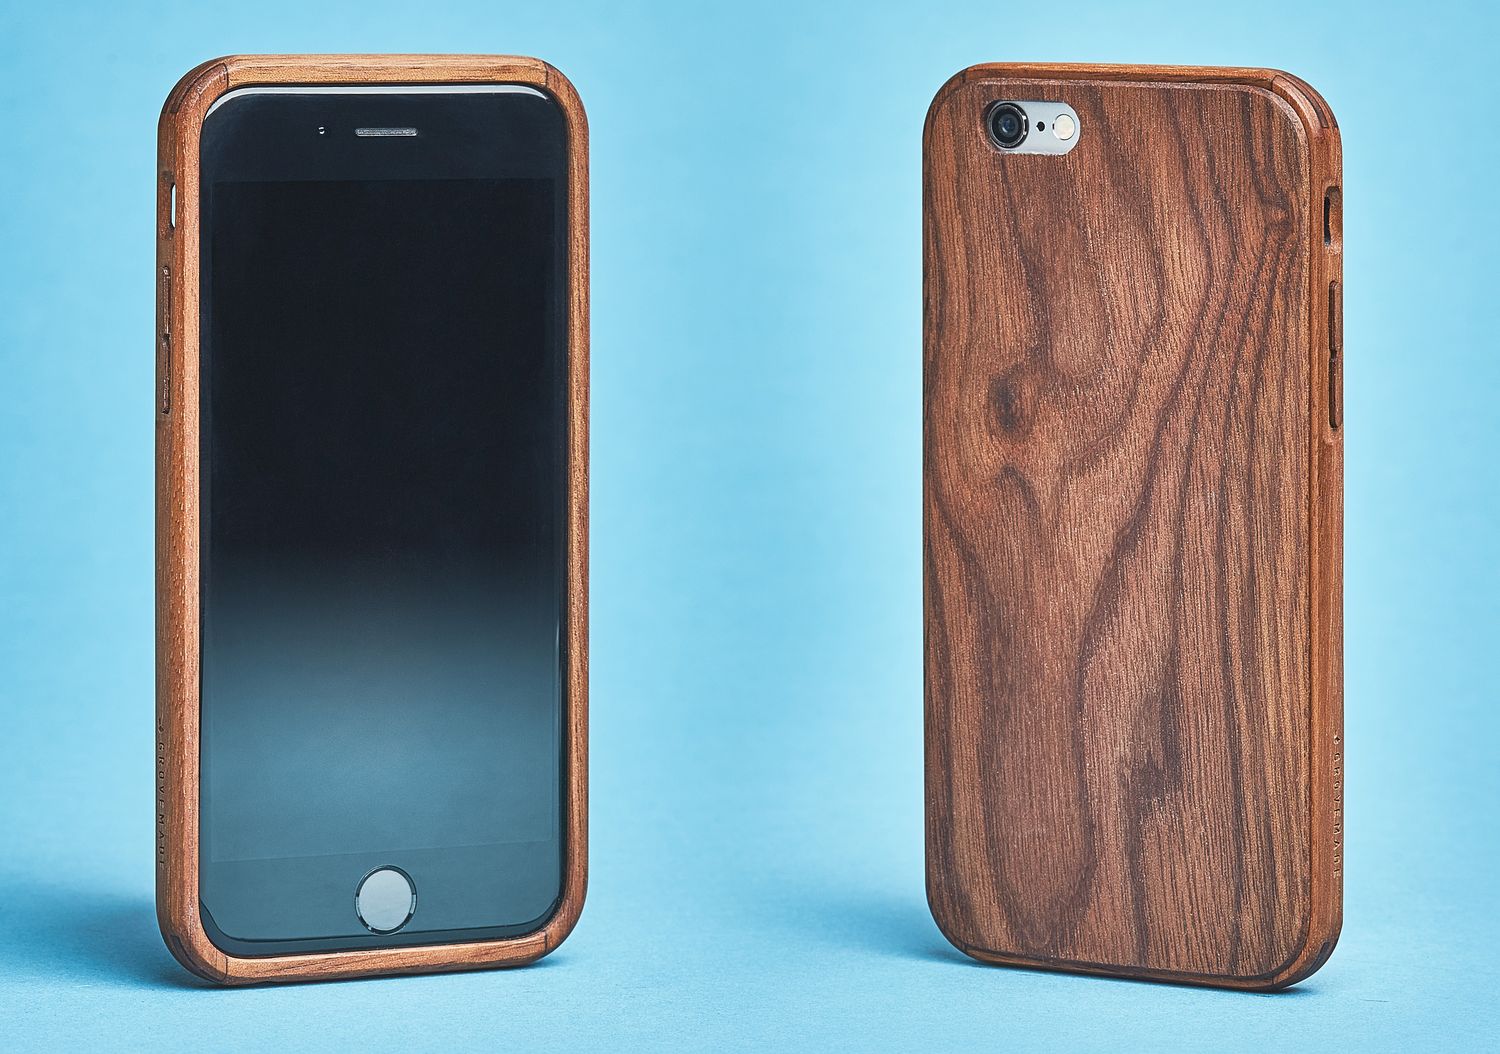 grovemade-gives-iphone-users-wood-with-sexy-new-walnut-and-maple-cases